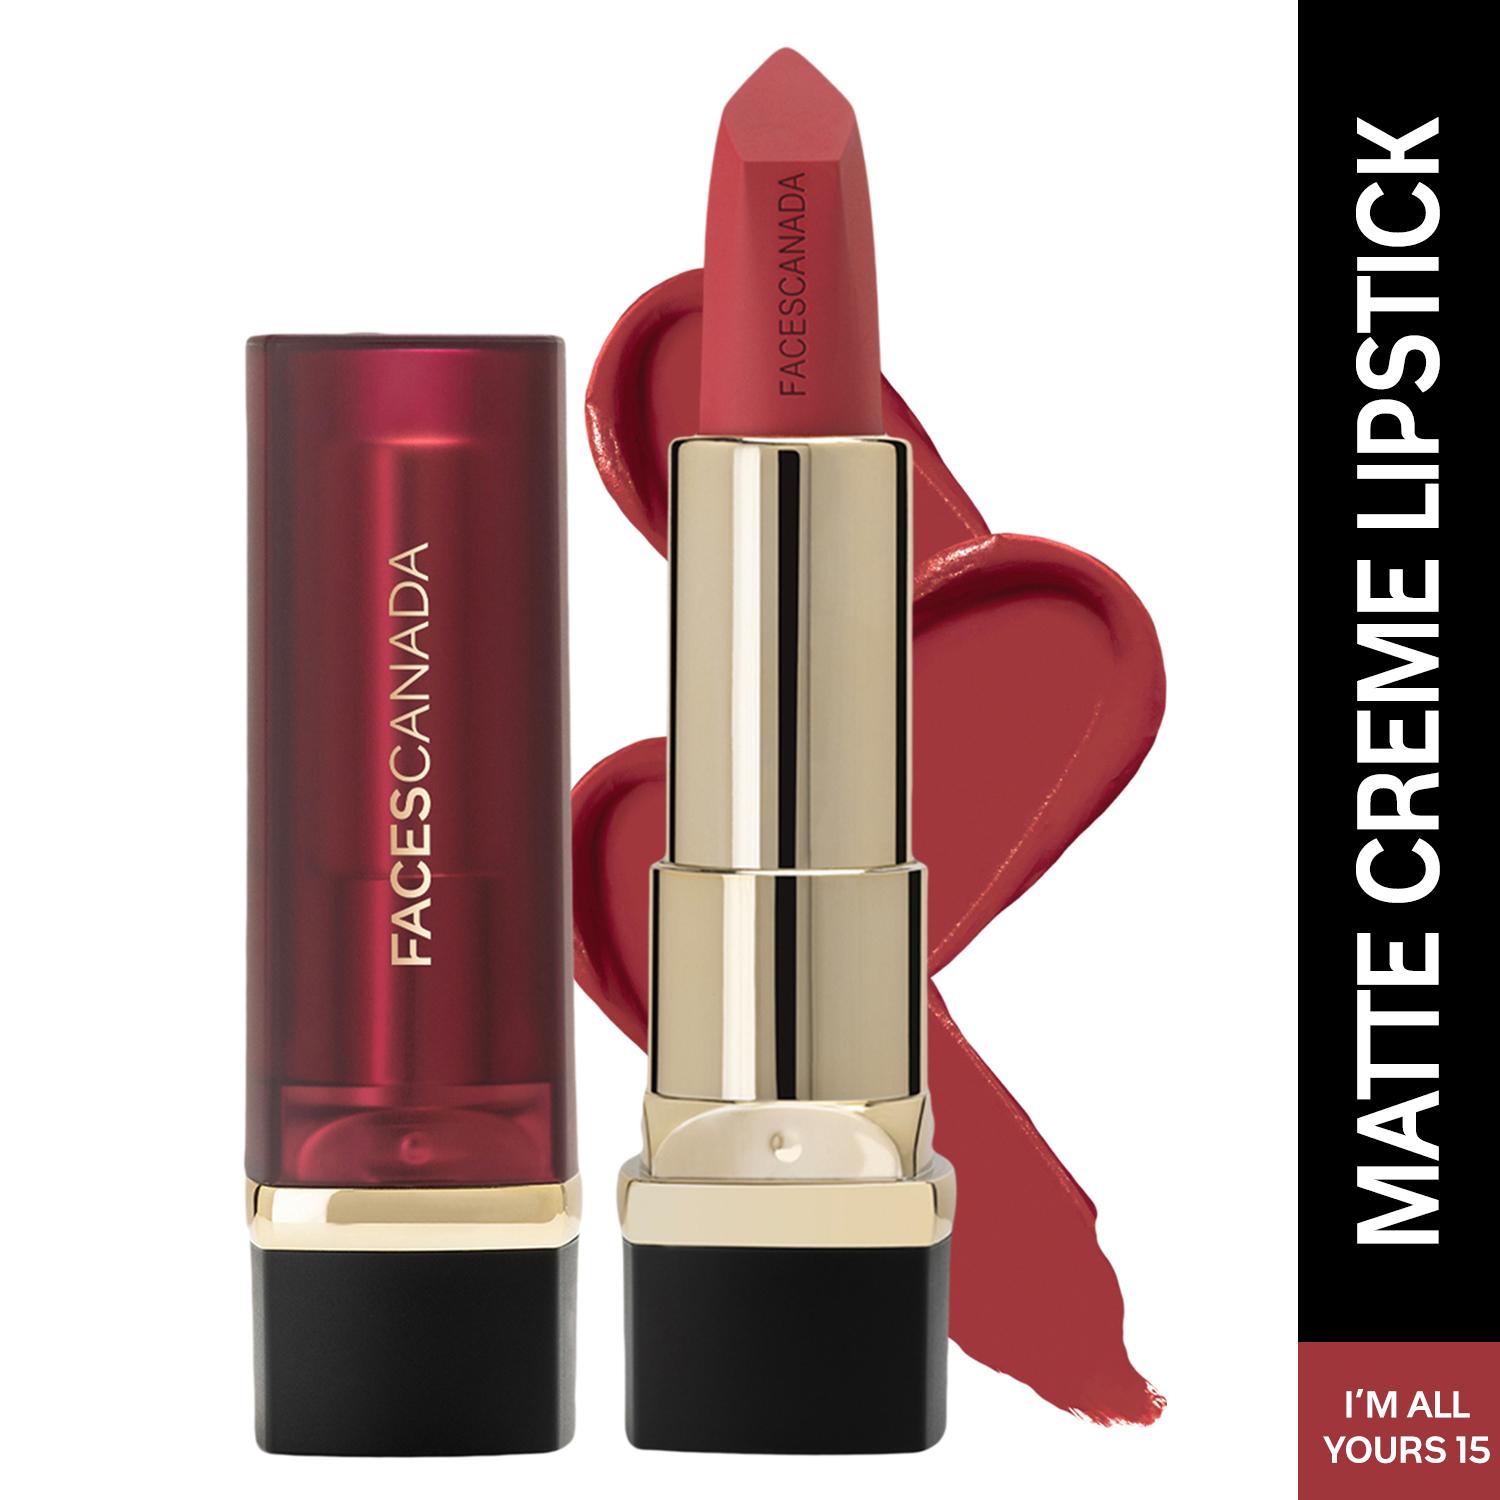 Faces Canada | Faces Canada Comfy Matte Crème Lipstick, 8HR Long Stay, Intense Color - I’m All Yours 15 (4.2 g)